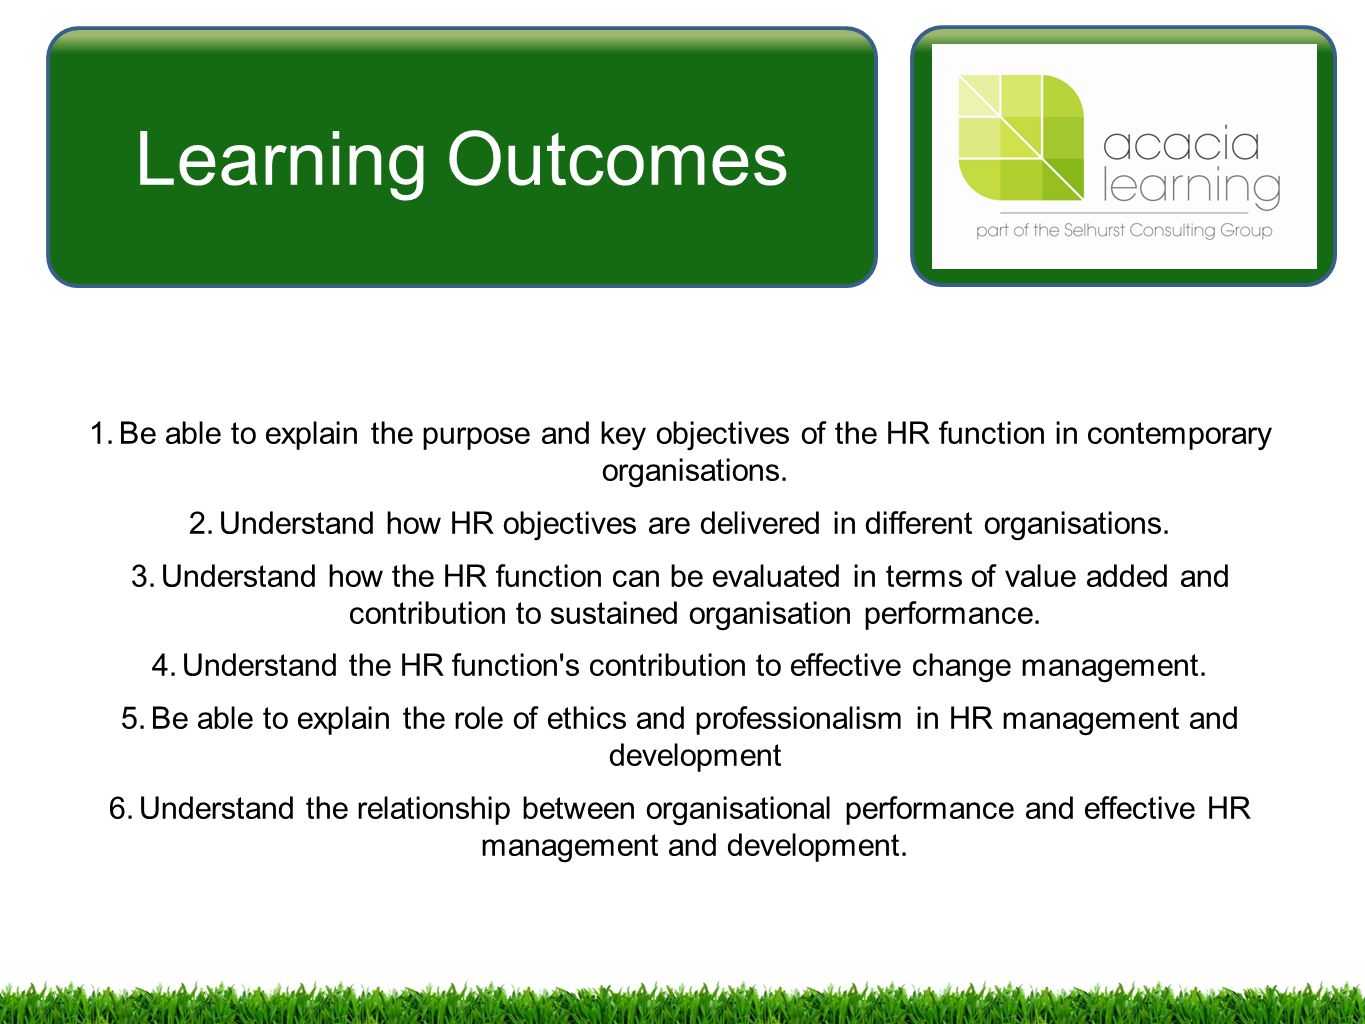 Understand how HR objectives are delivered in different organisations.